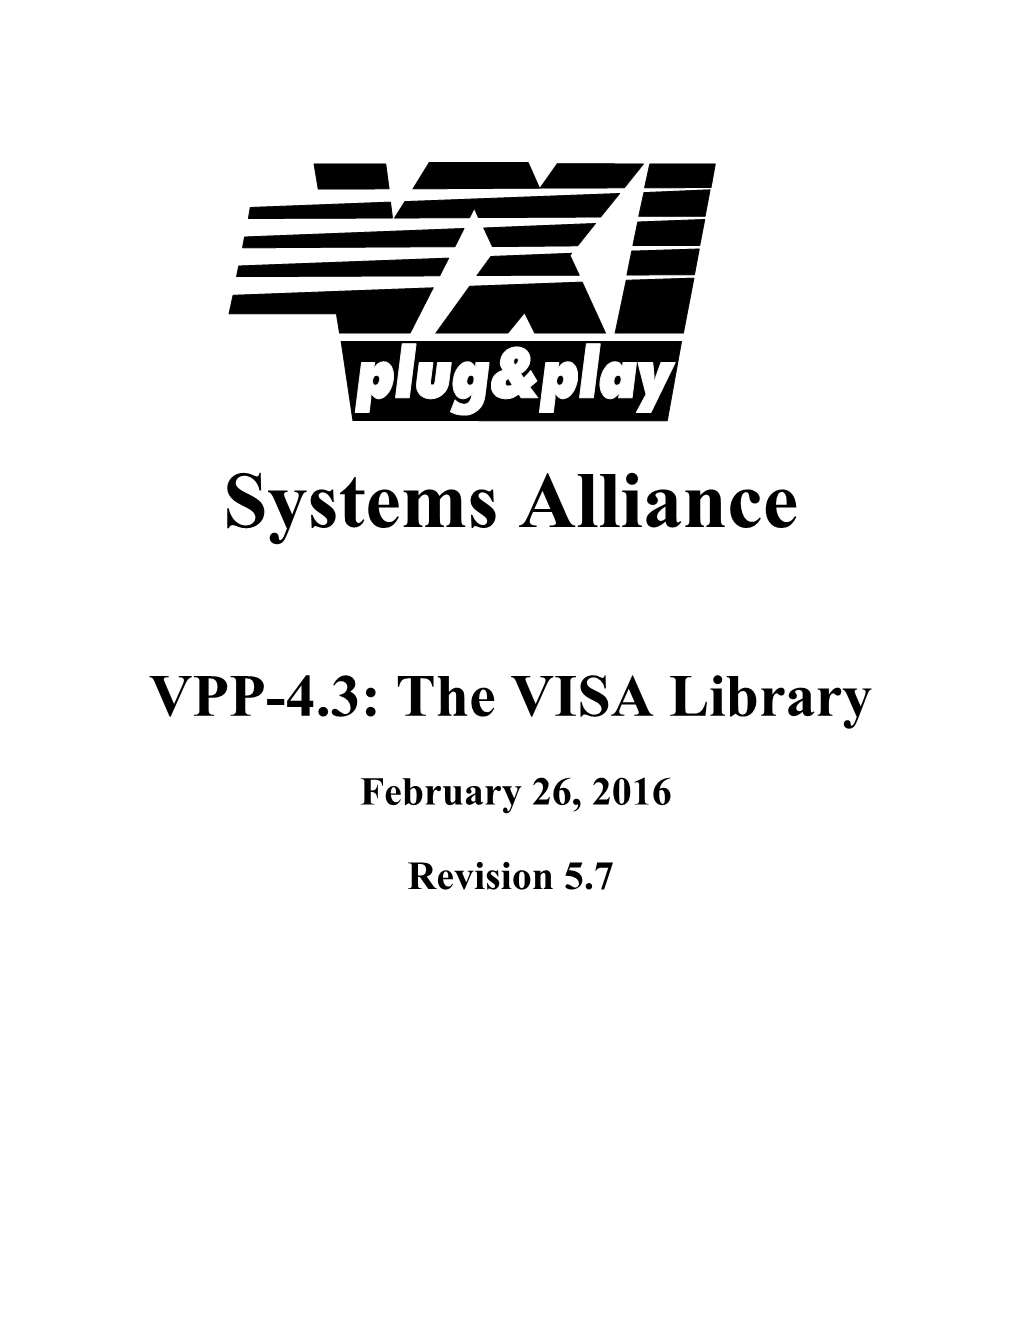 The VISA Library Specification